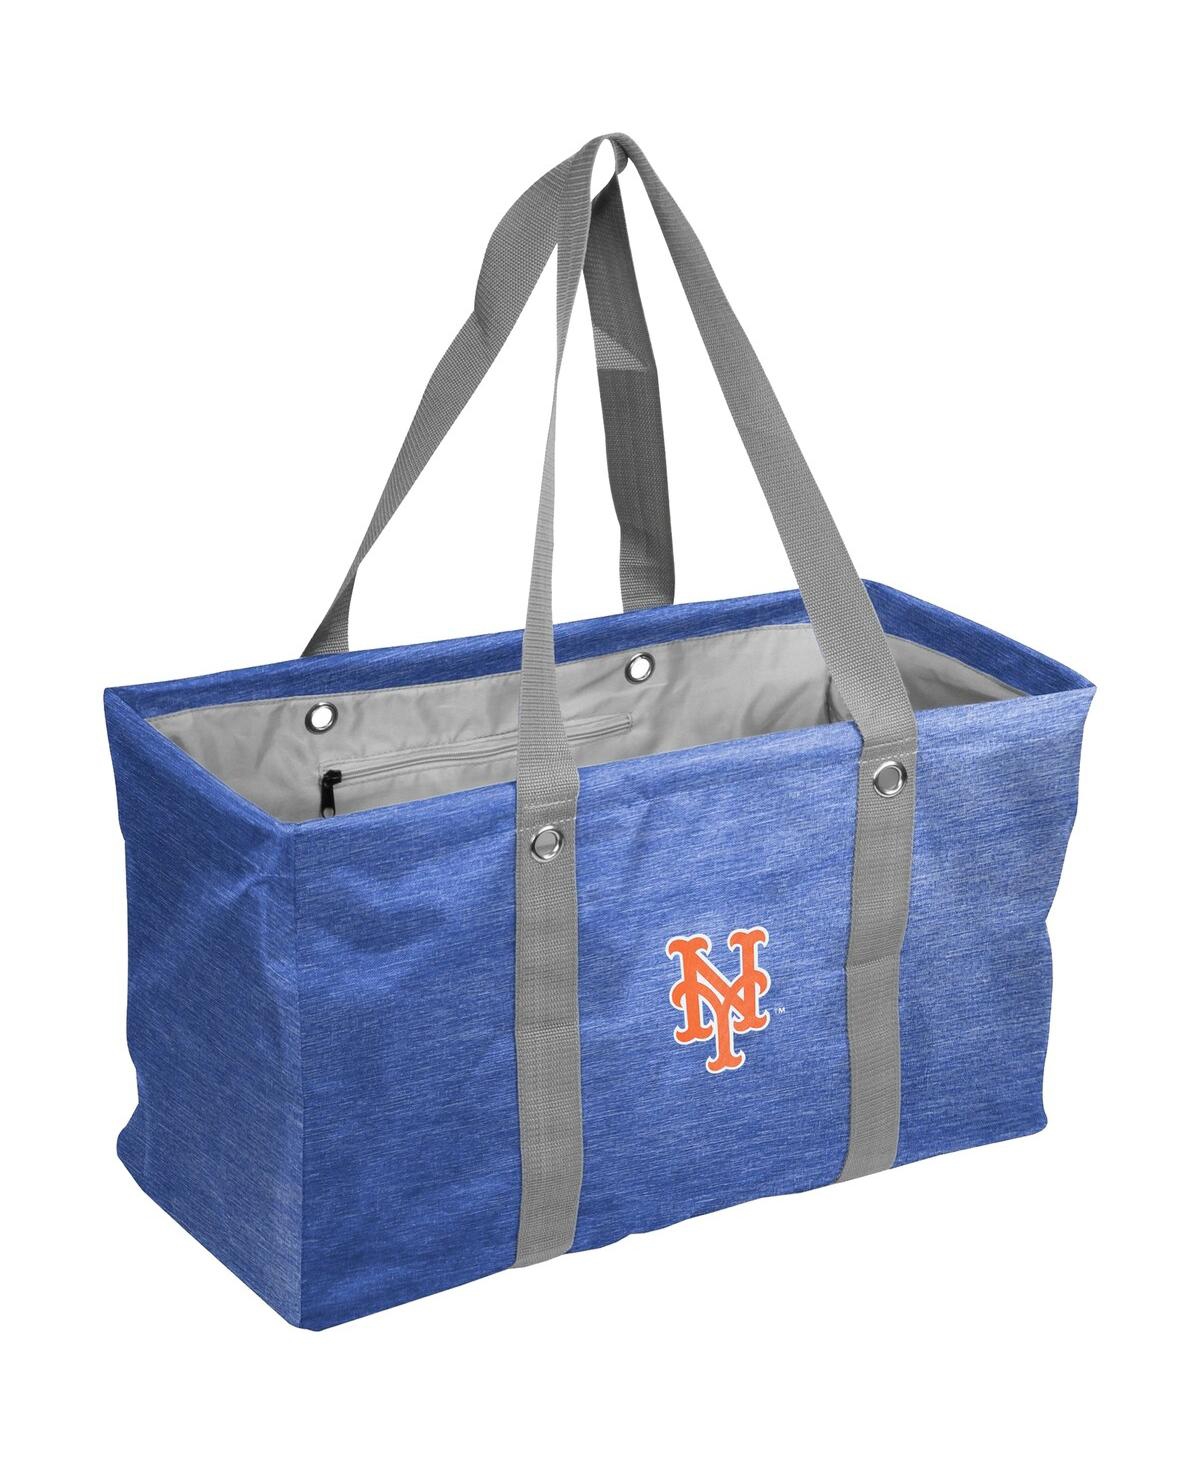 Men's and Women's New York Mets Crosshatch Picnic Caddy Tote Bag - Royal